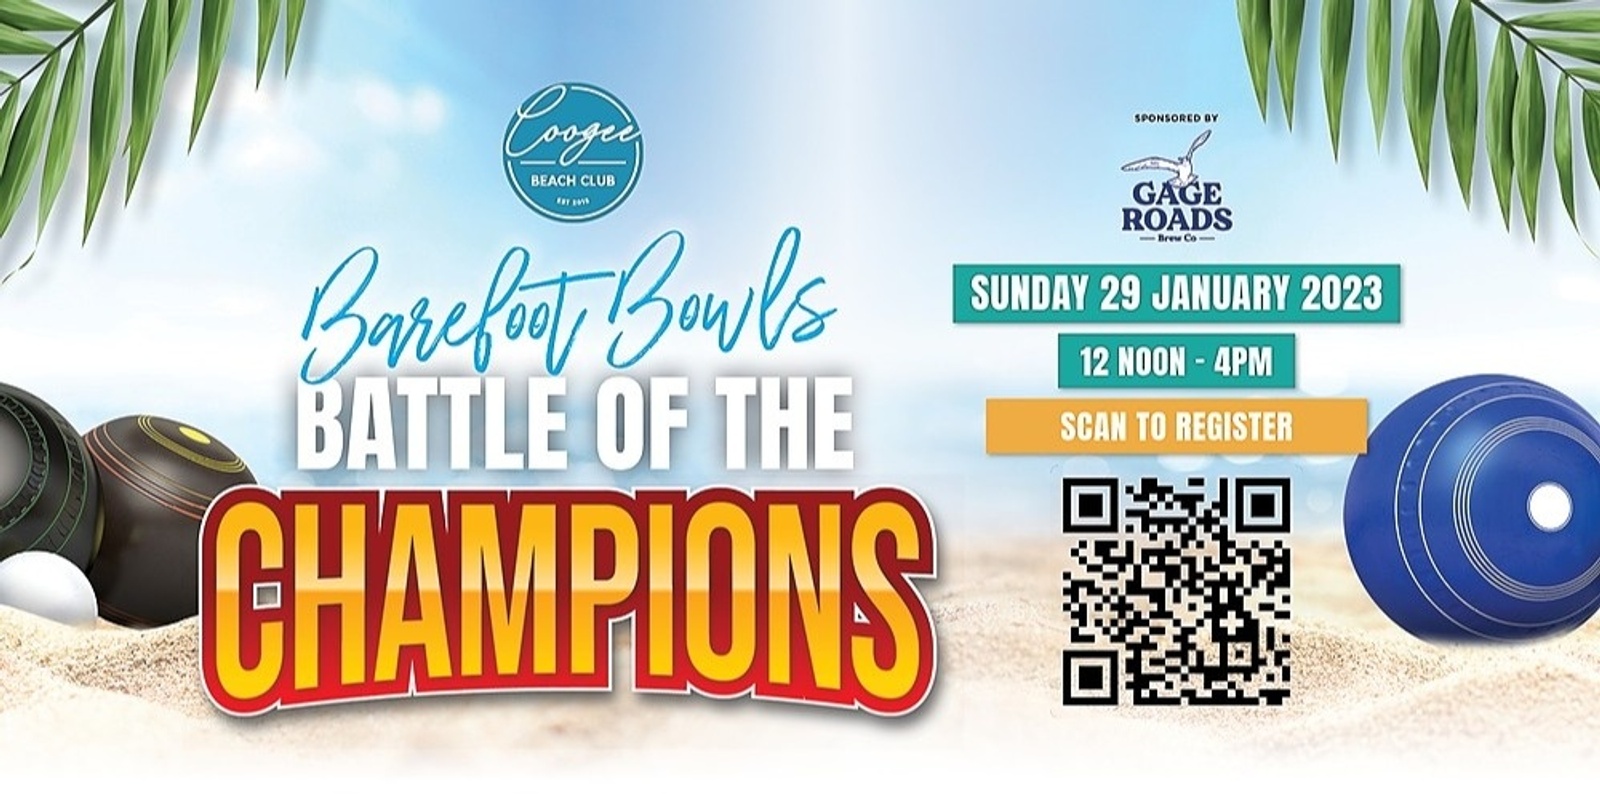 Banner image for Barefoot Bowls Battle of the Champions